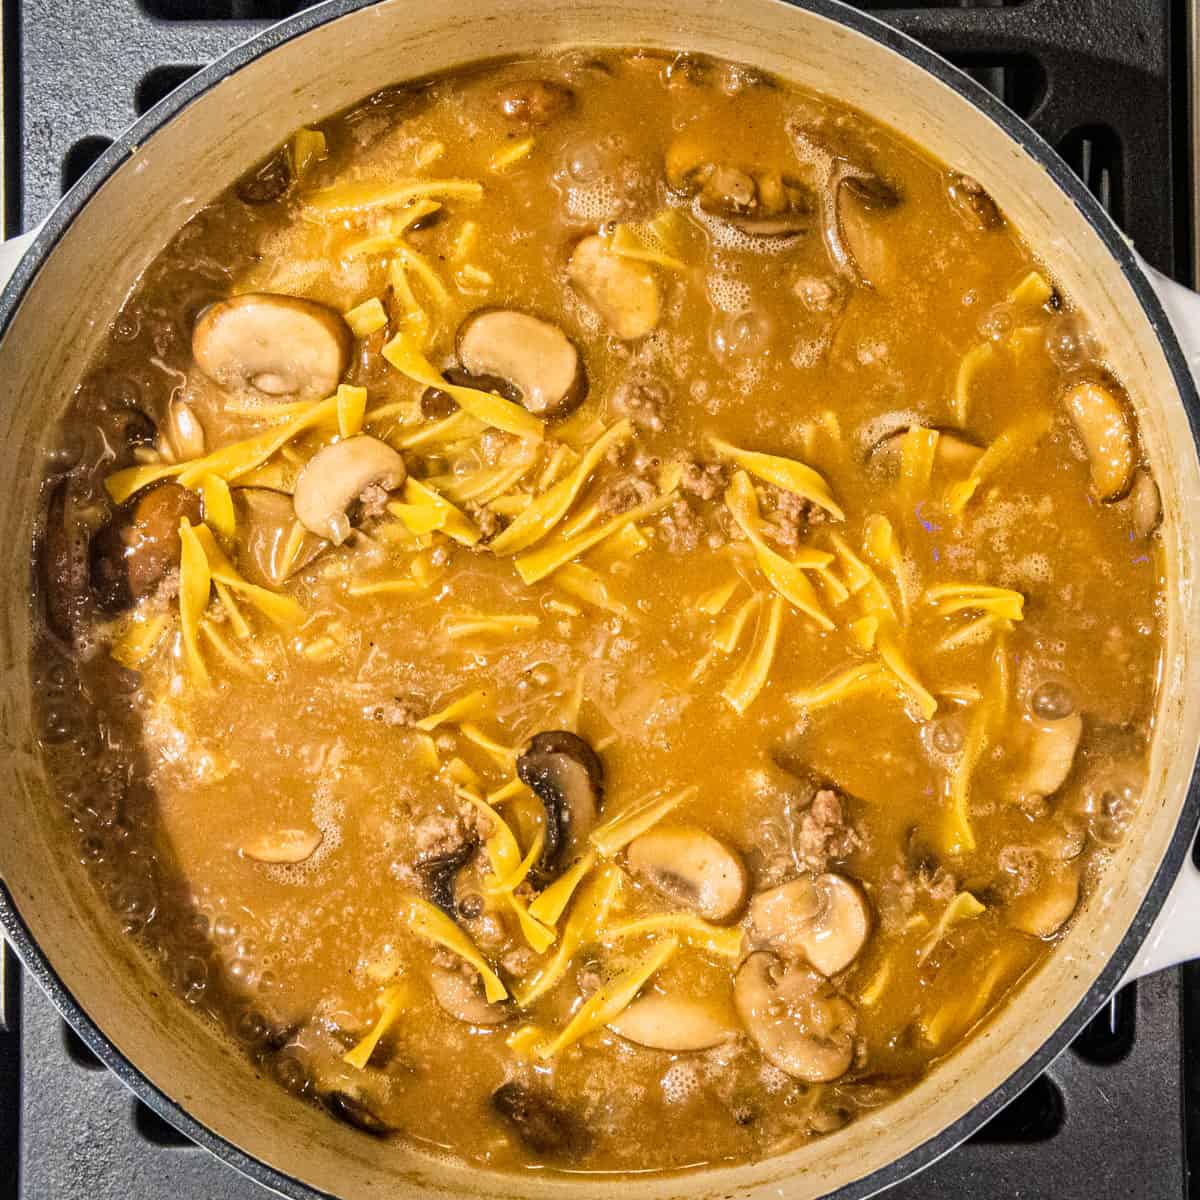 A dutch oven filled with ground beef, sauteéd mushrooms, egg noodles and beef stock simmering on a stove.